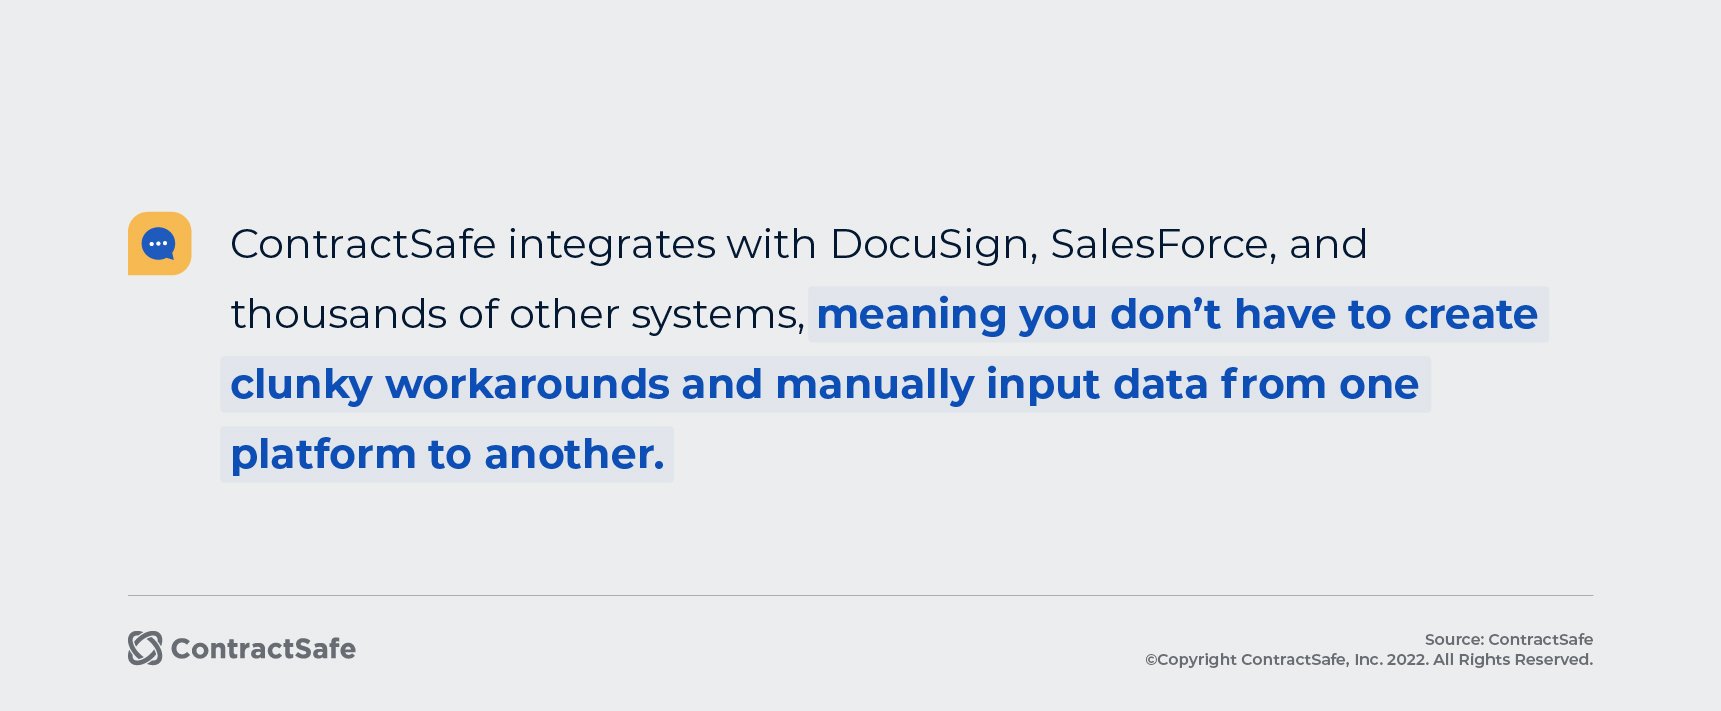 ContractSafe integrates with DocuSign, SalesForce and thousands of other systems, meaning you don't have to create clunky workarounds and manually input data from one platform to another.